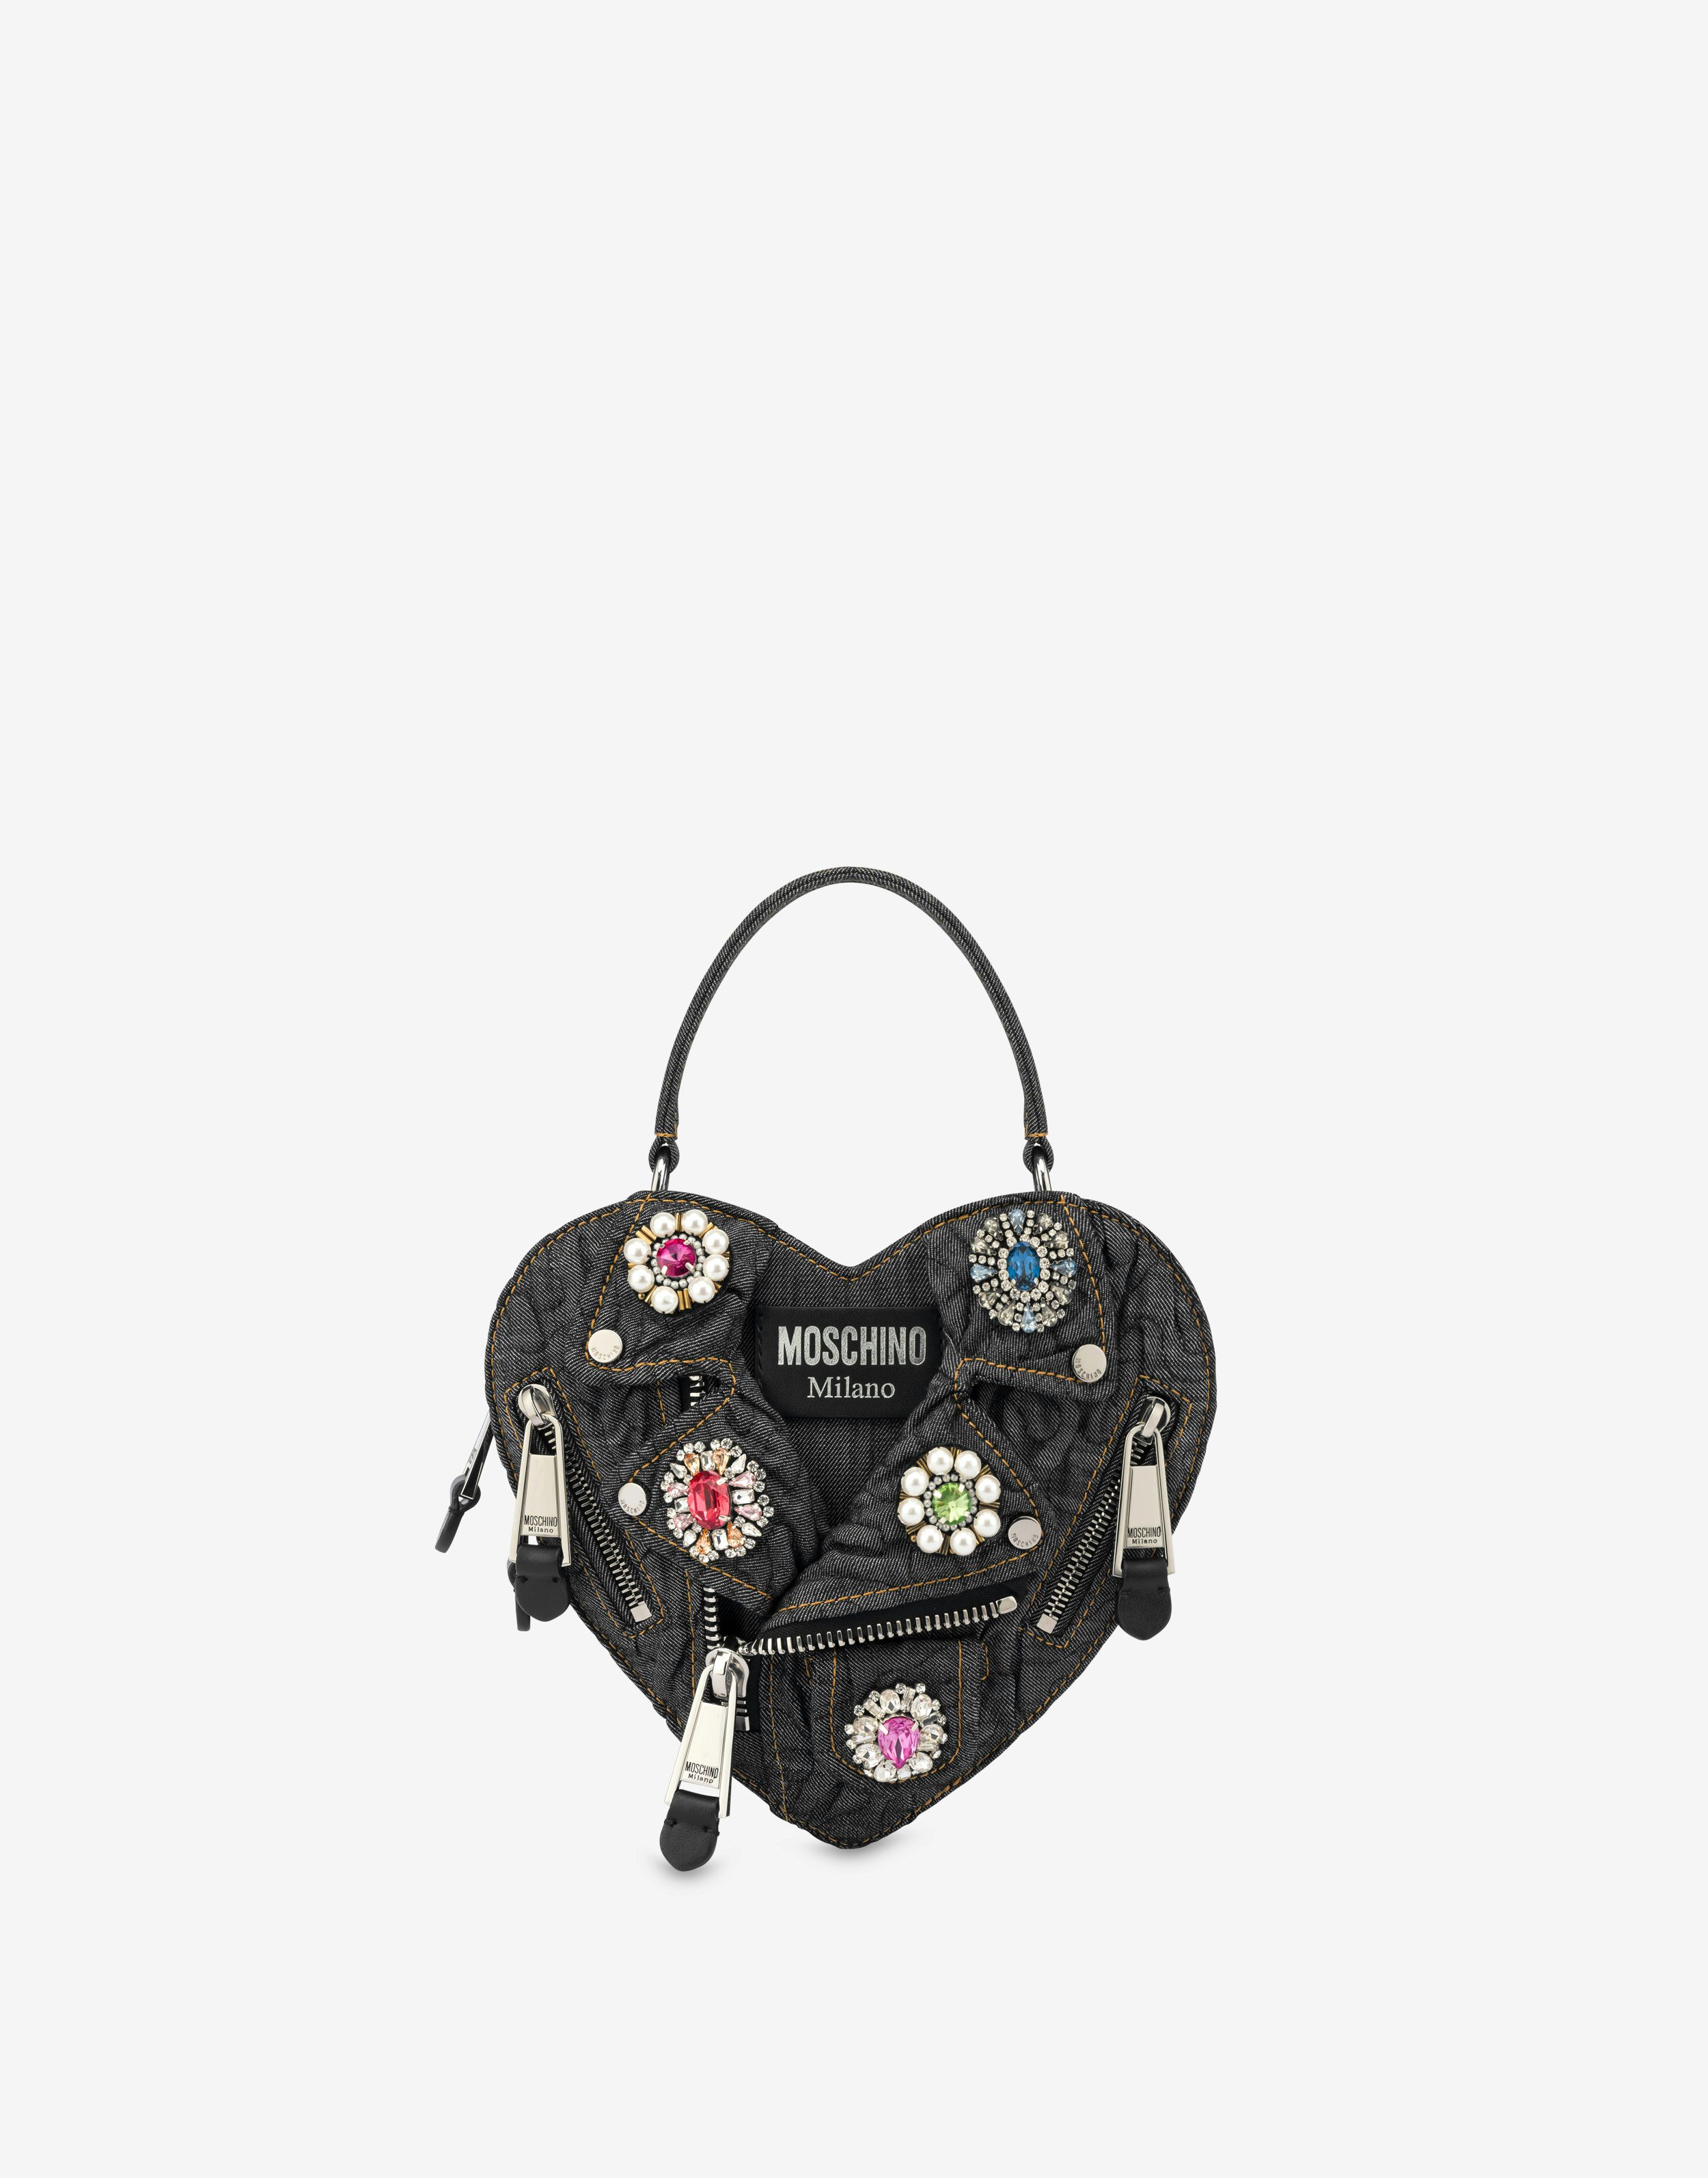 MOSCHINO Quilted leather shoulder bag | THE OUTNET